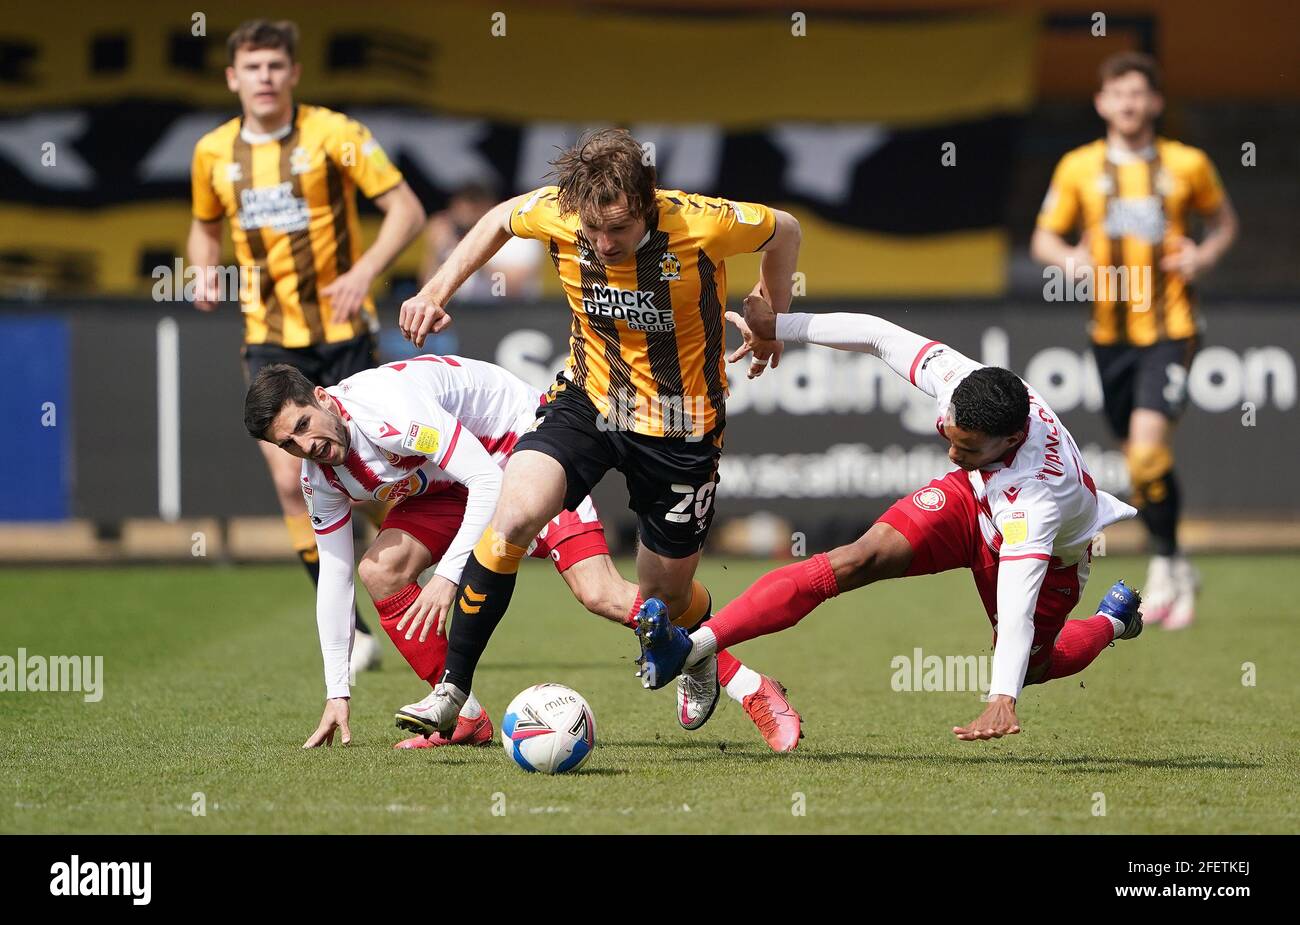 Cambridge United's Joe Ironside (centre) evades a tackle from Stevenage's Terence Vancooten (right) during the Sky Bet League Two match at Abbey Stadium, Cambridge. Picture date: Saturday April 24, 2021. Stock Photo